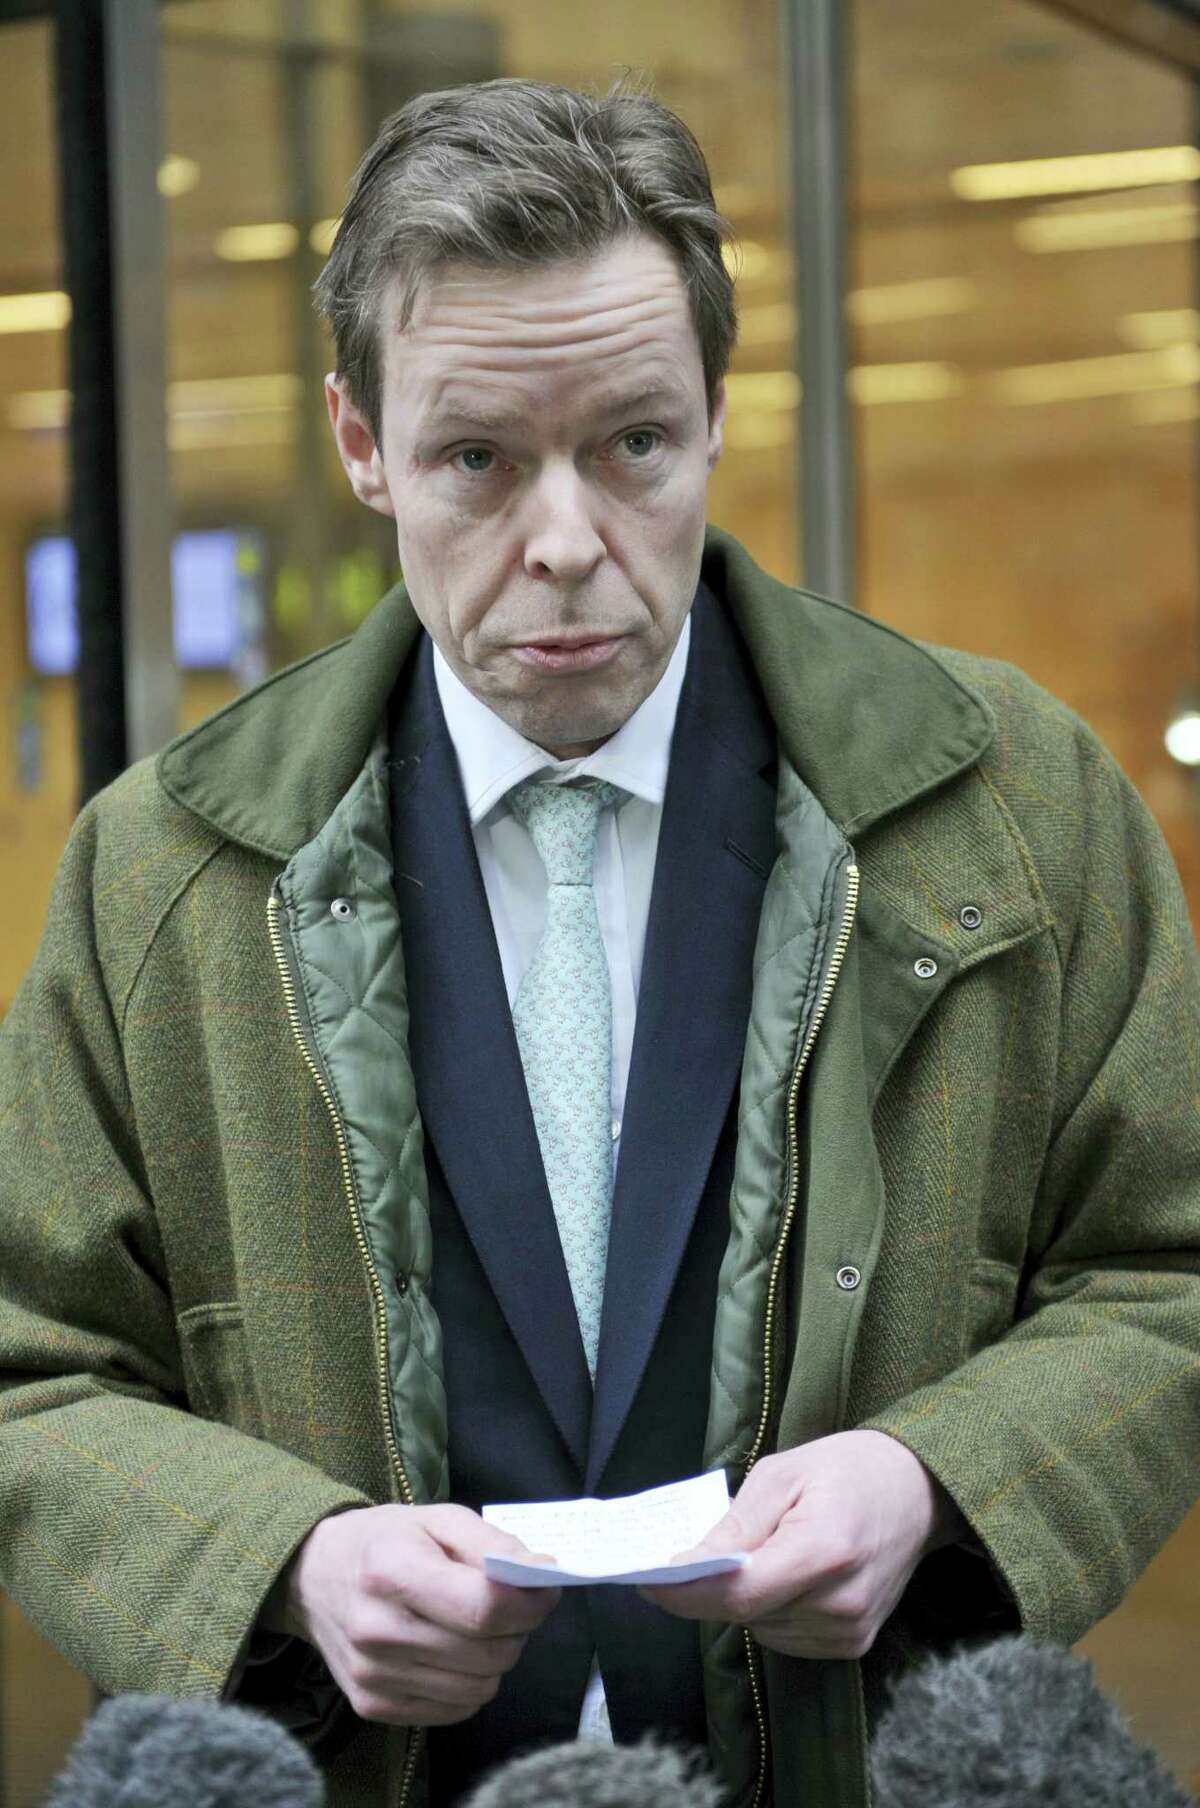 George Bingham, the only son of missing peer Lord Lucan, speaks to the media outside the High Court in London, where he was granted a death certificate by a High Court judge Wednesday Feb. 3, 2016. The only son of the notorious Lord Lucan, who has been missing since 1974 when a woman was found dead in his home, has been granted a death certificate in his father’s case.